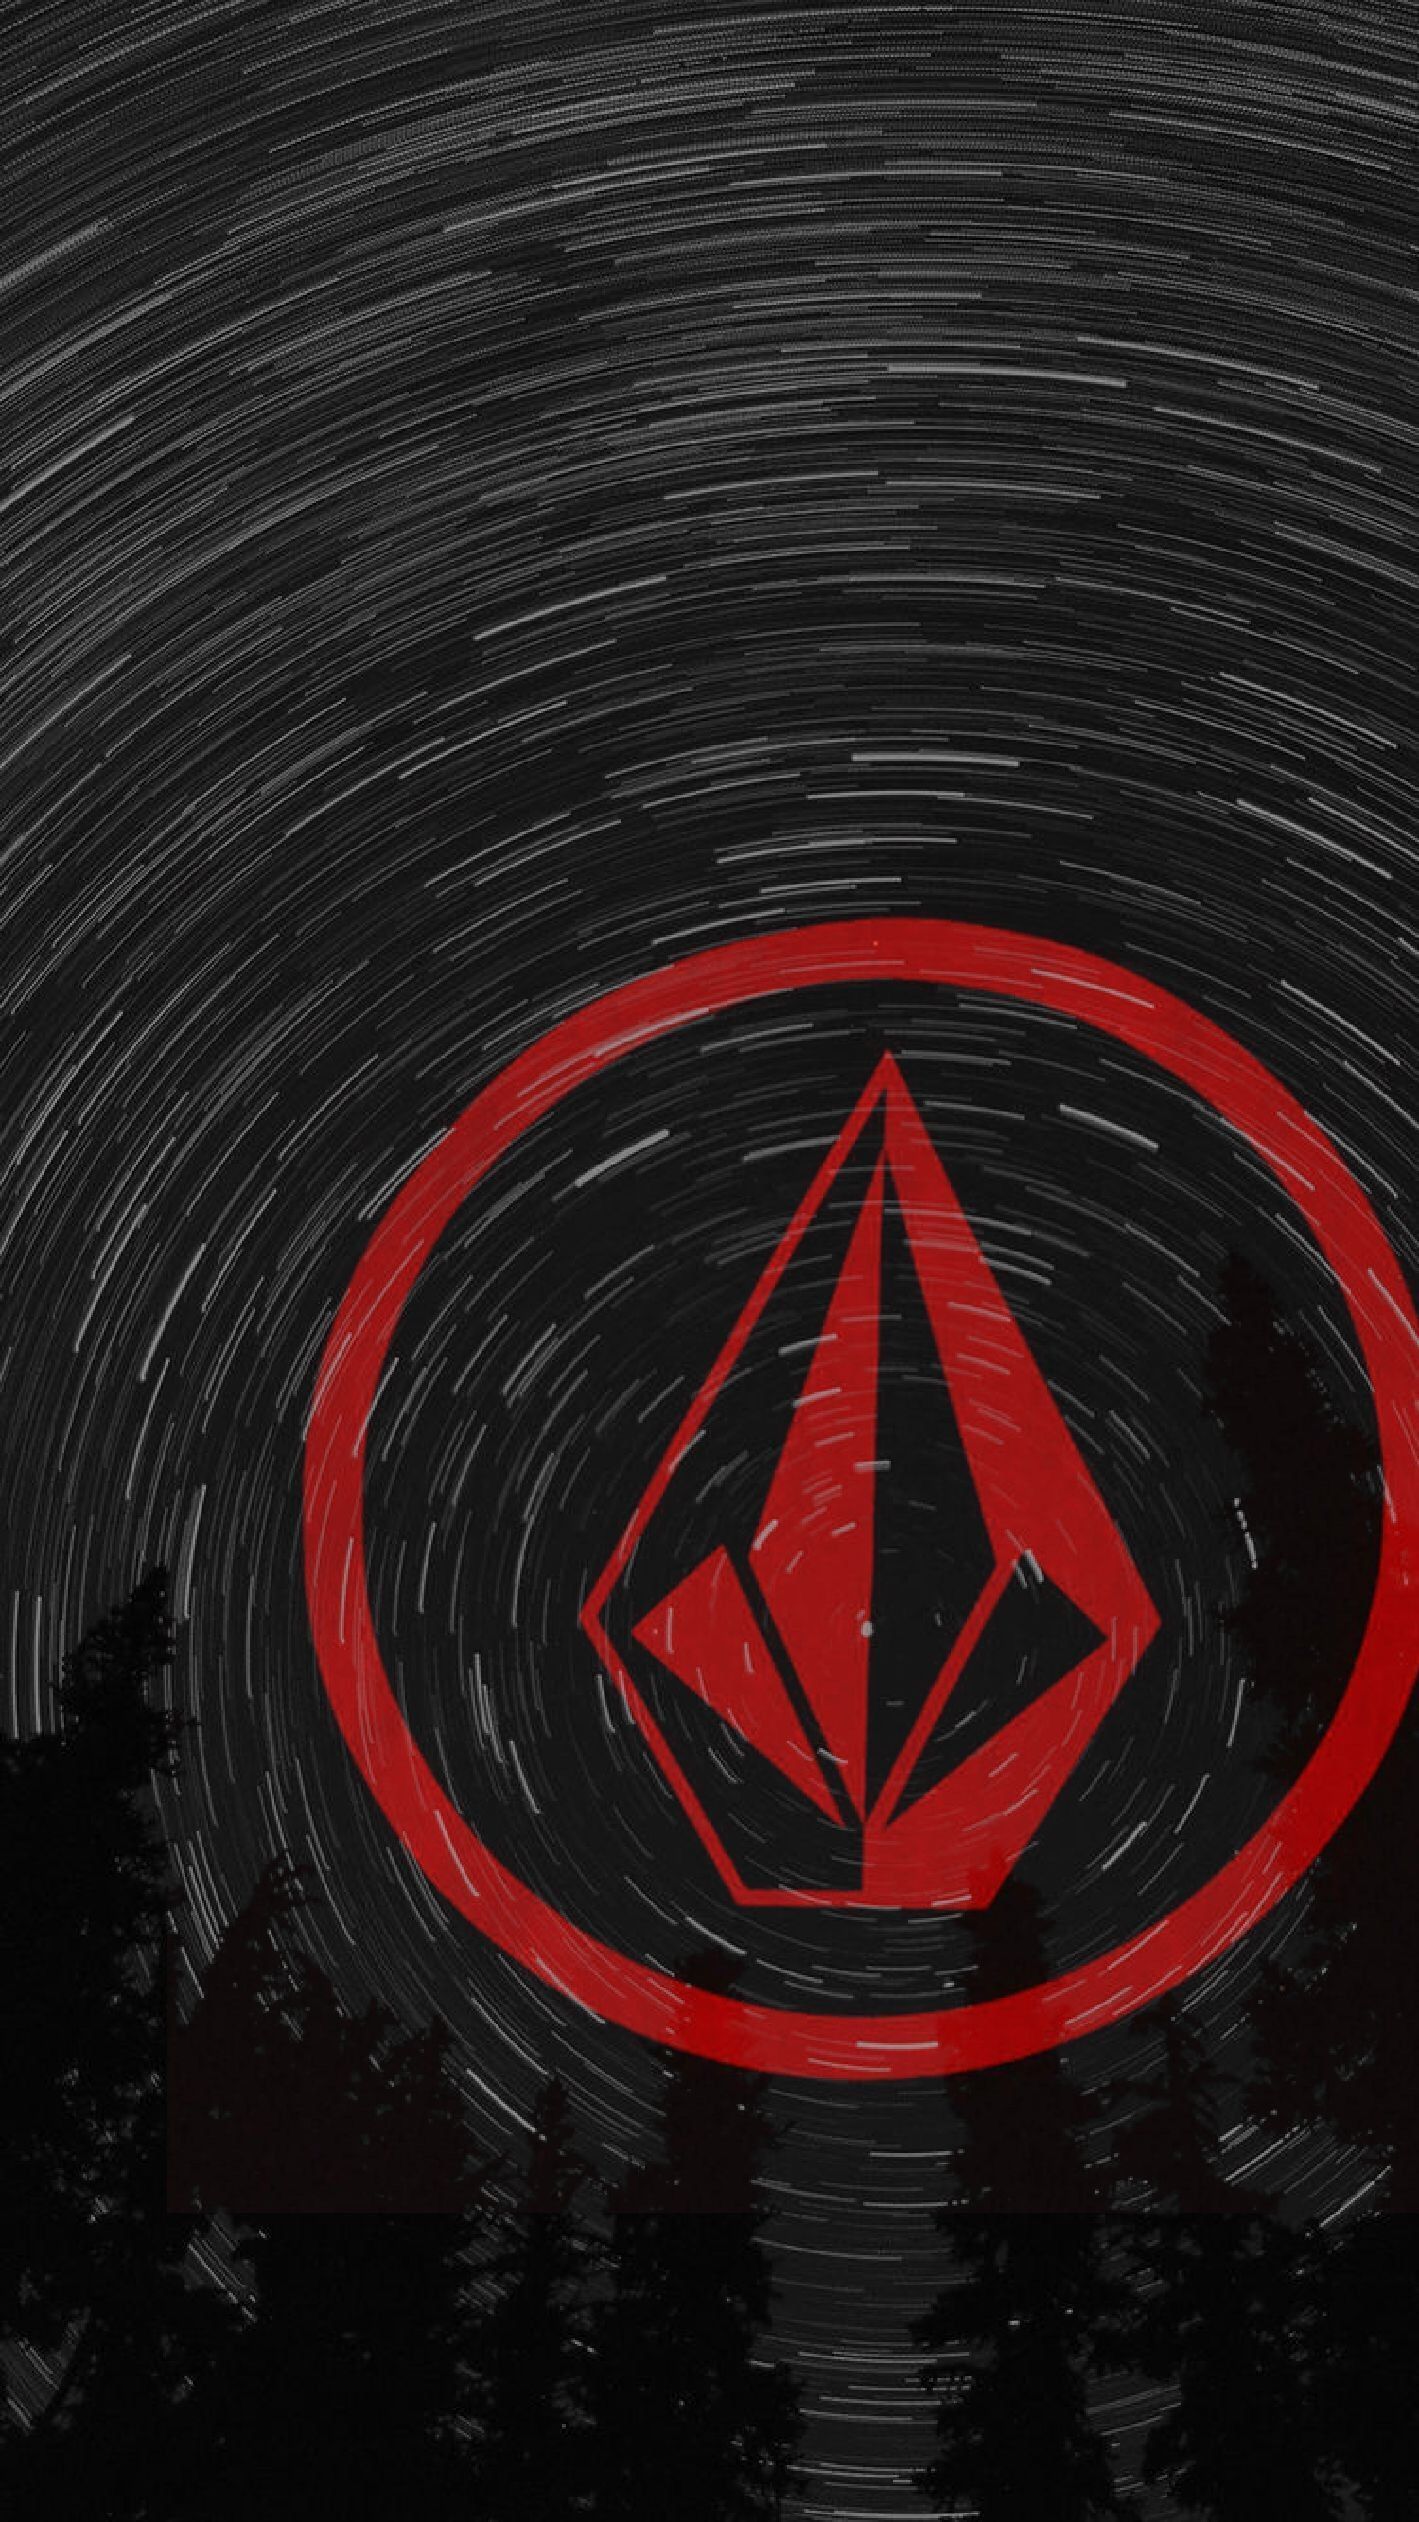 Red Volcom Stone Wallpapers